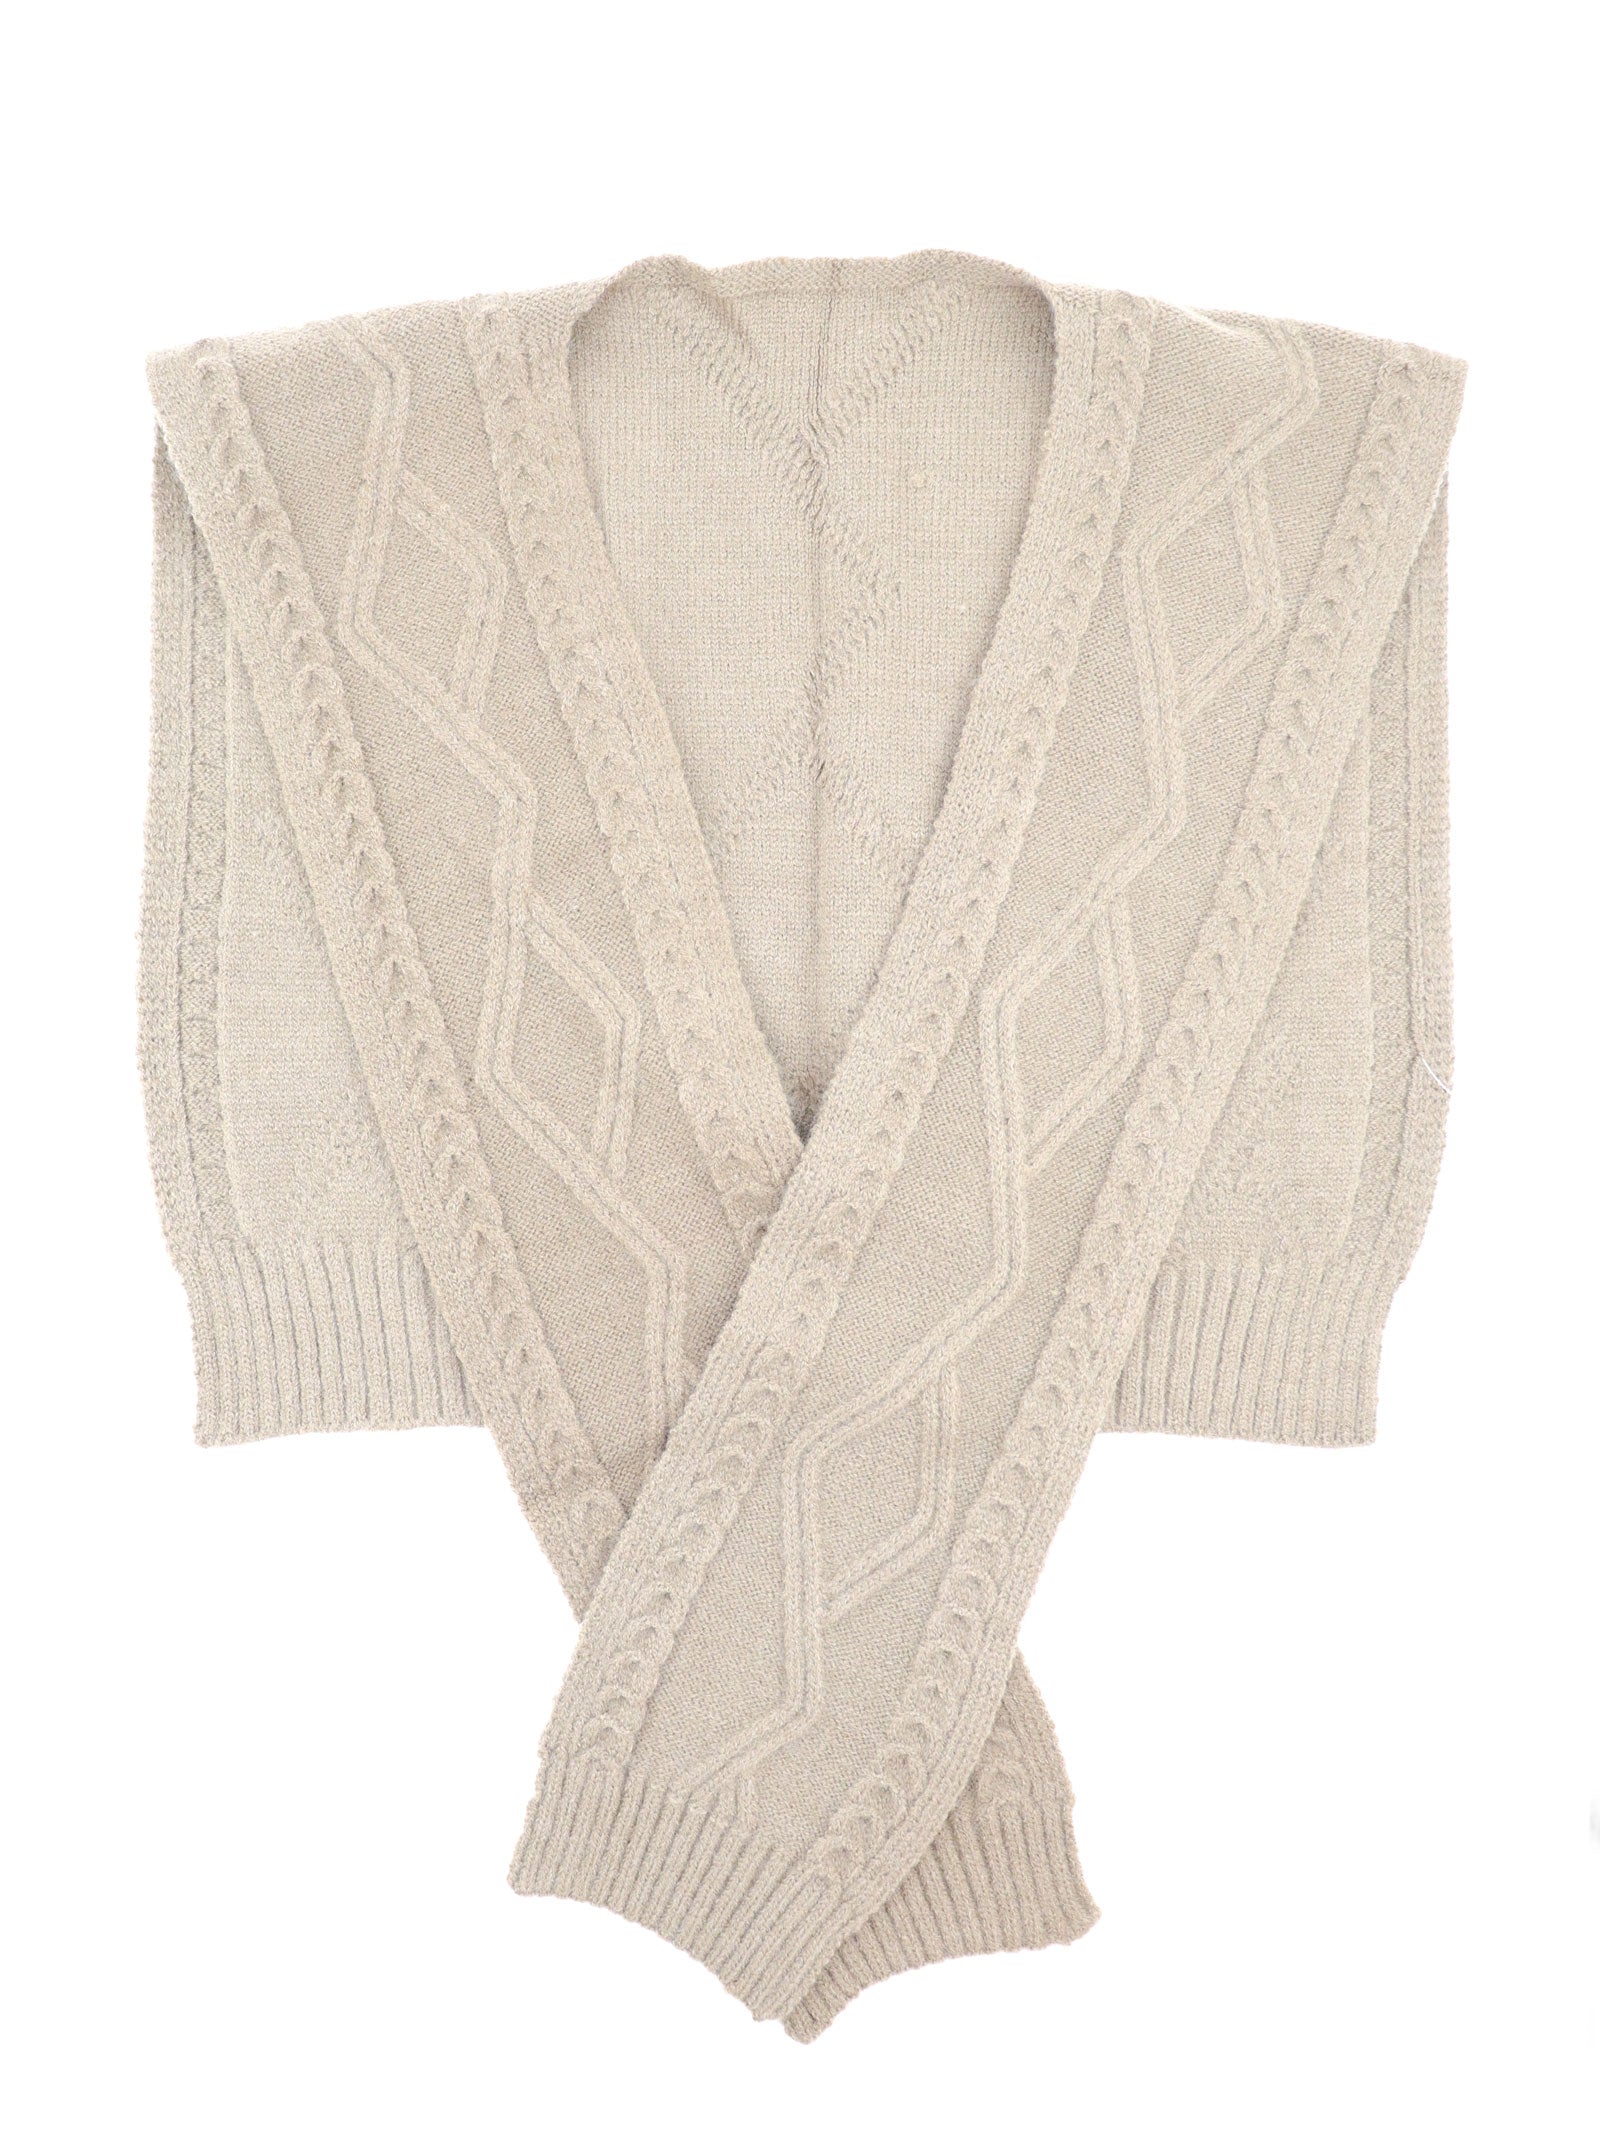 EVENA KNITTED STOLE